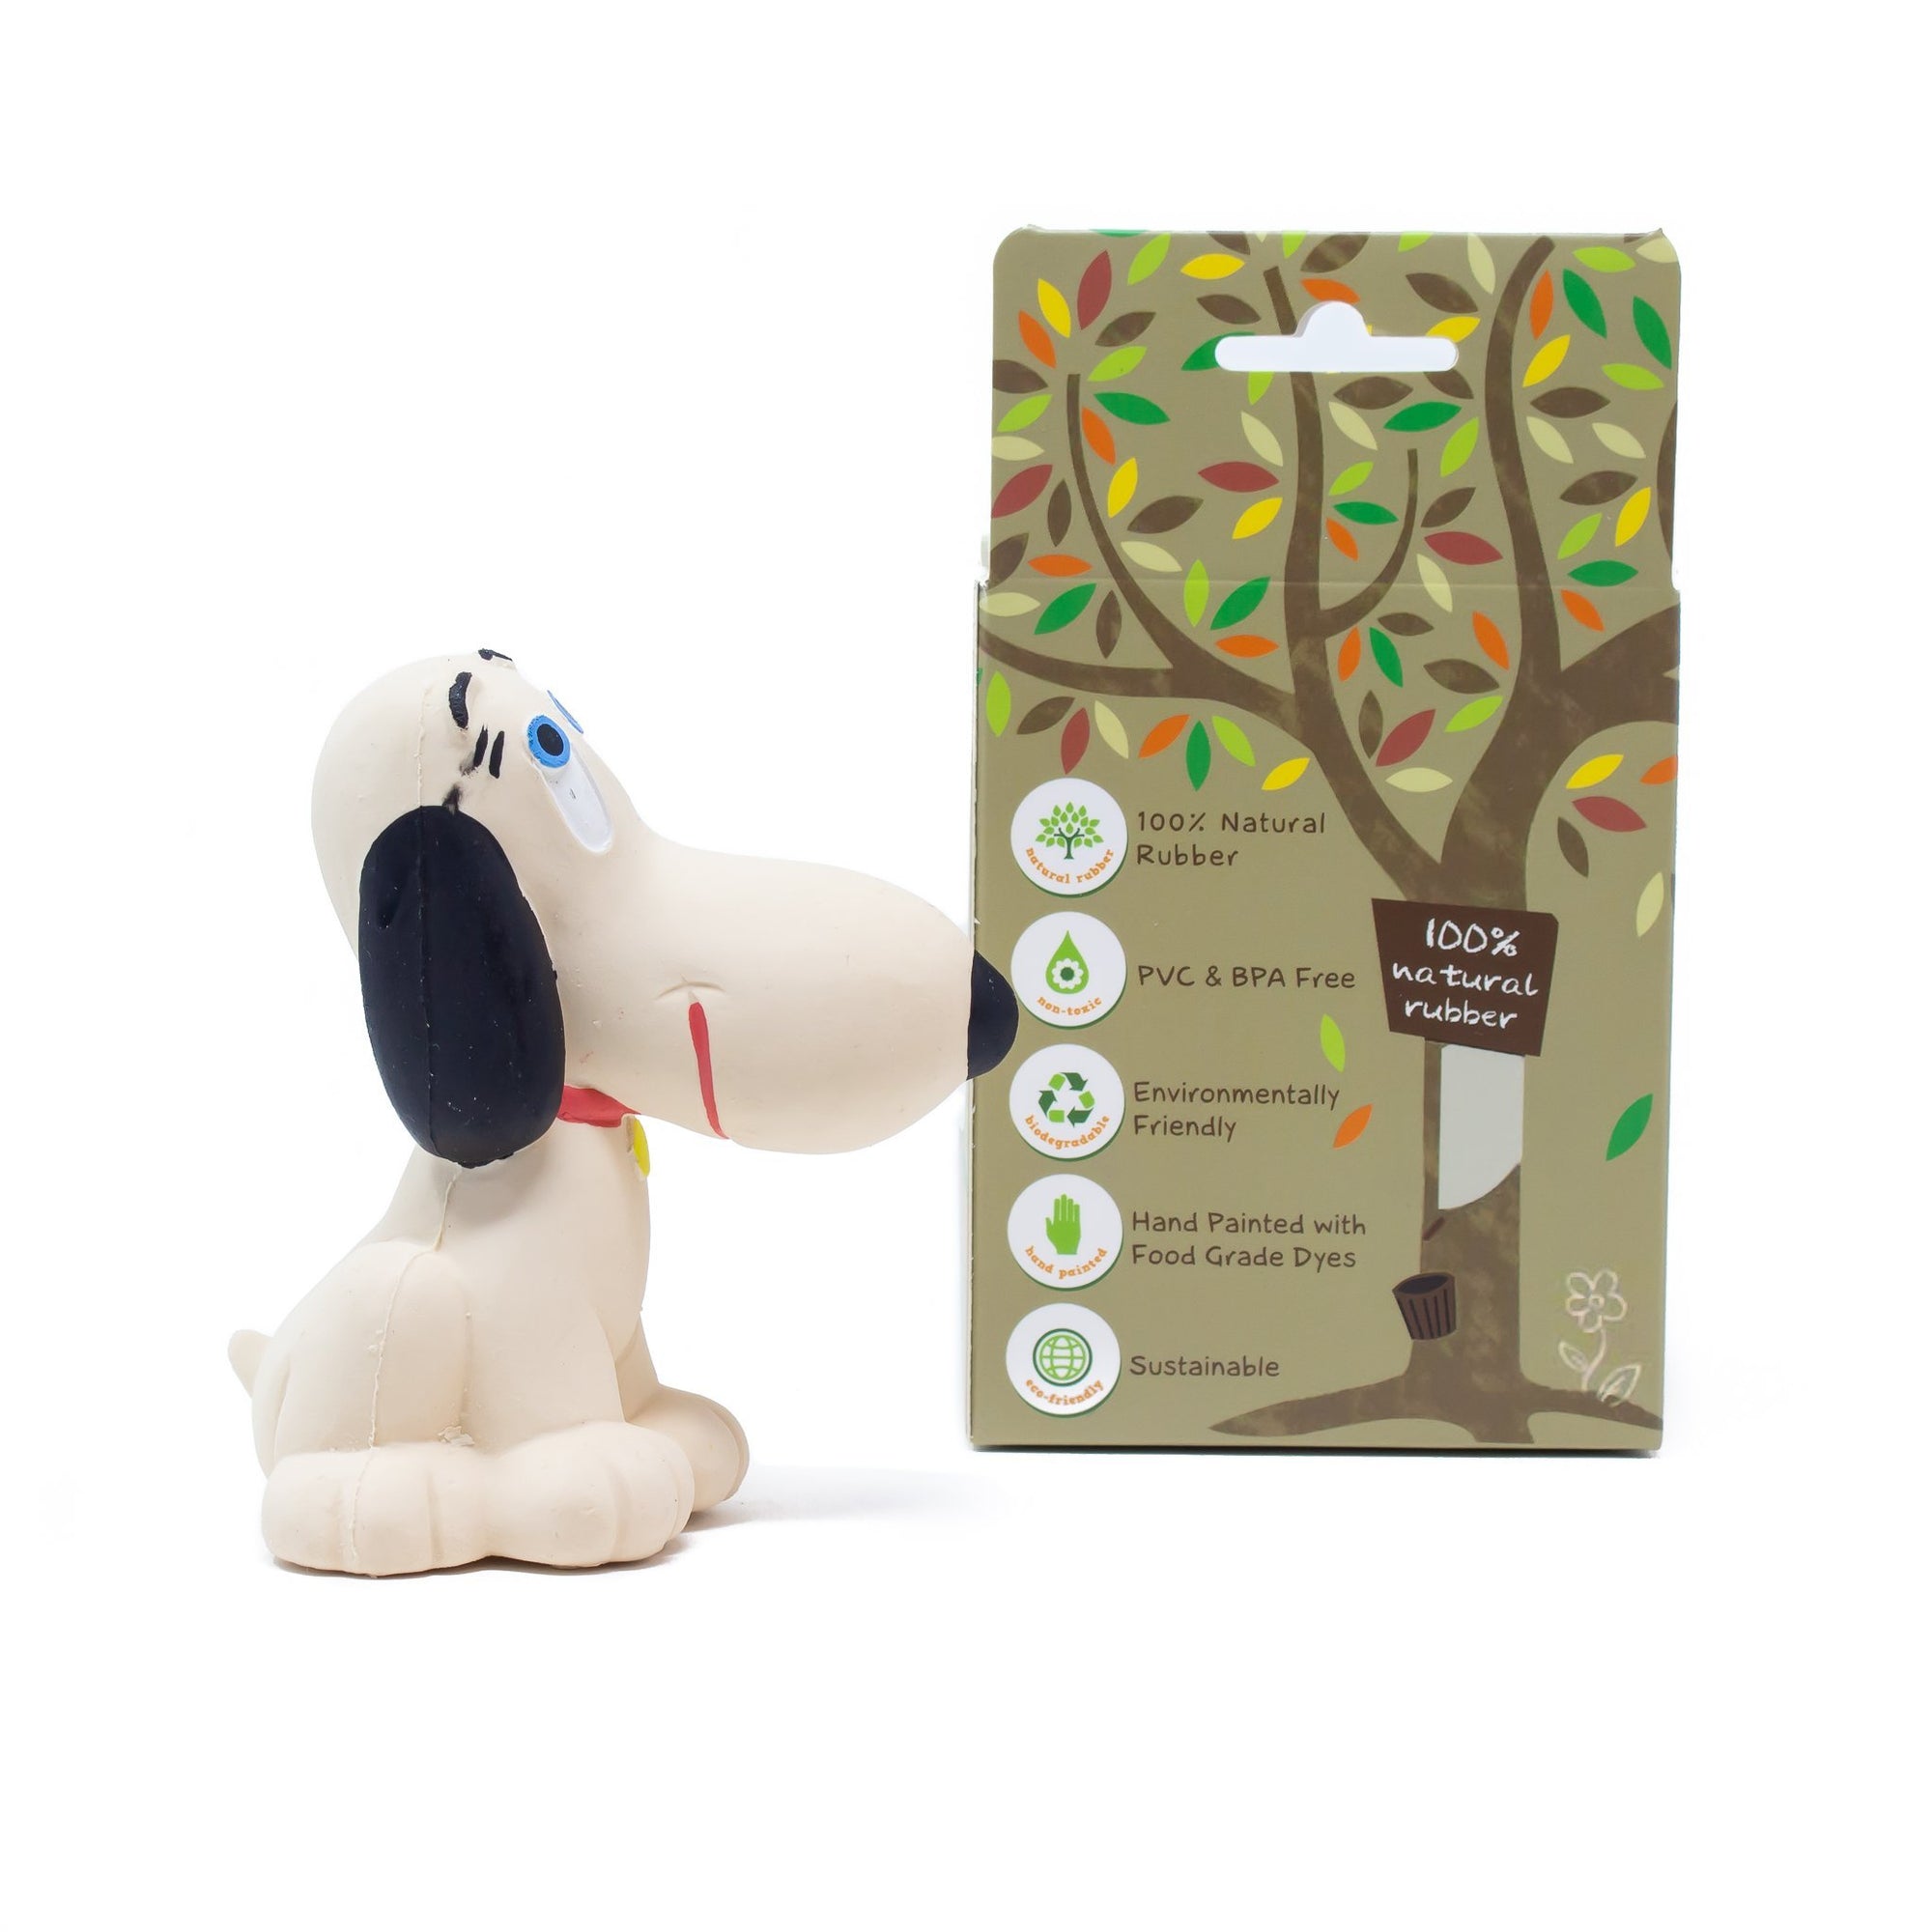 SNOOPY the Dog - Natural Rubber Toys